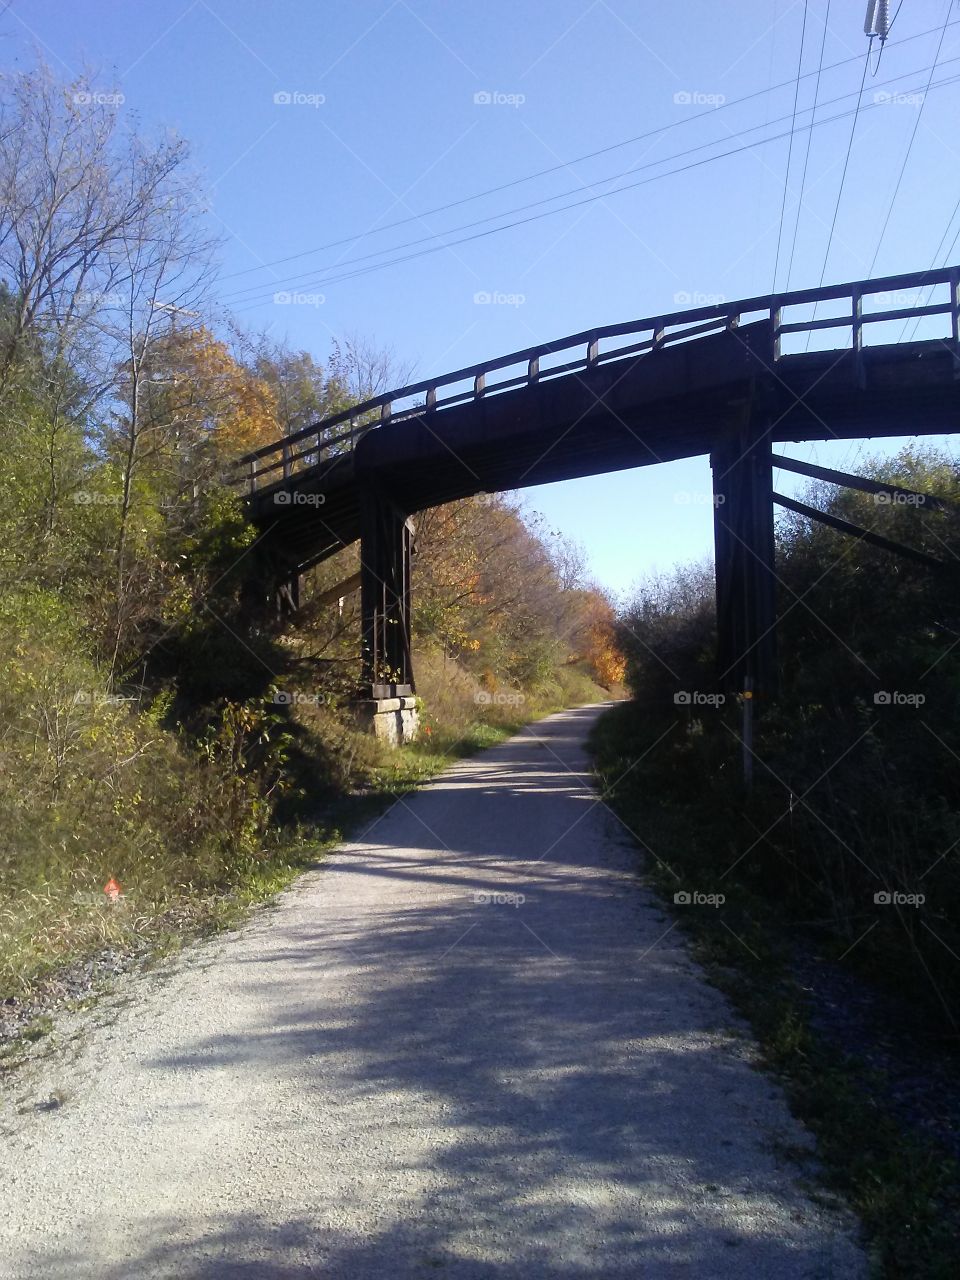 A one lane bridge over the Eisenbahn State Trail on the North side of West Bend, Wisconsin.